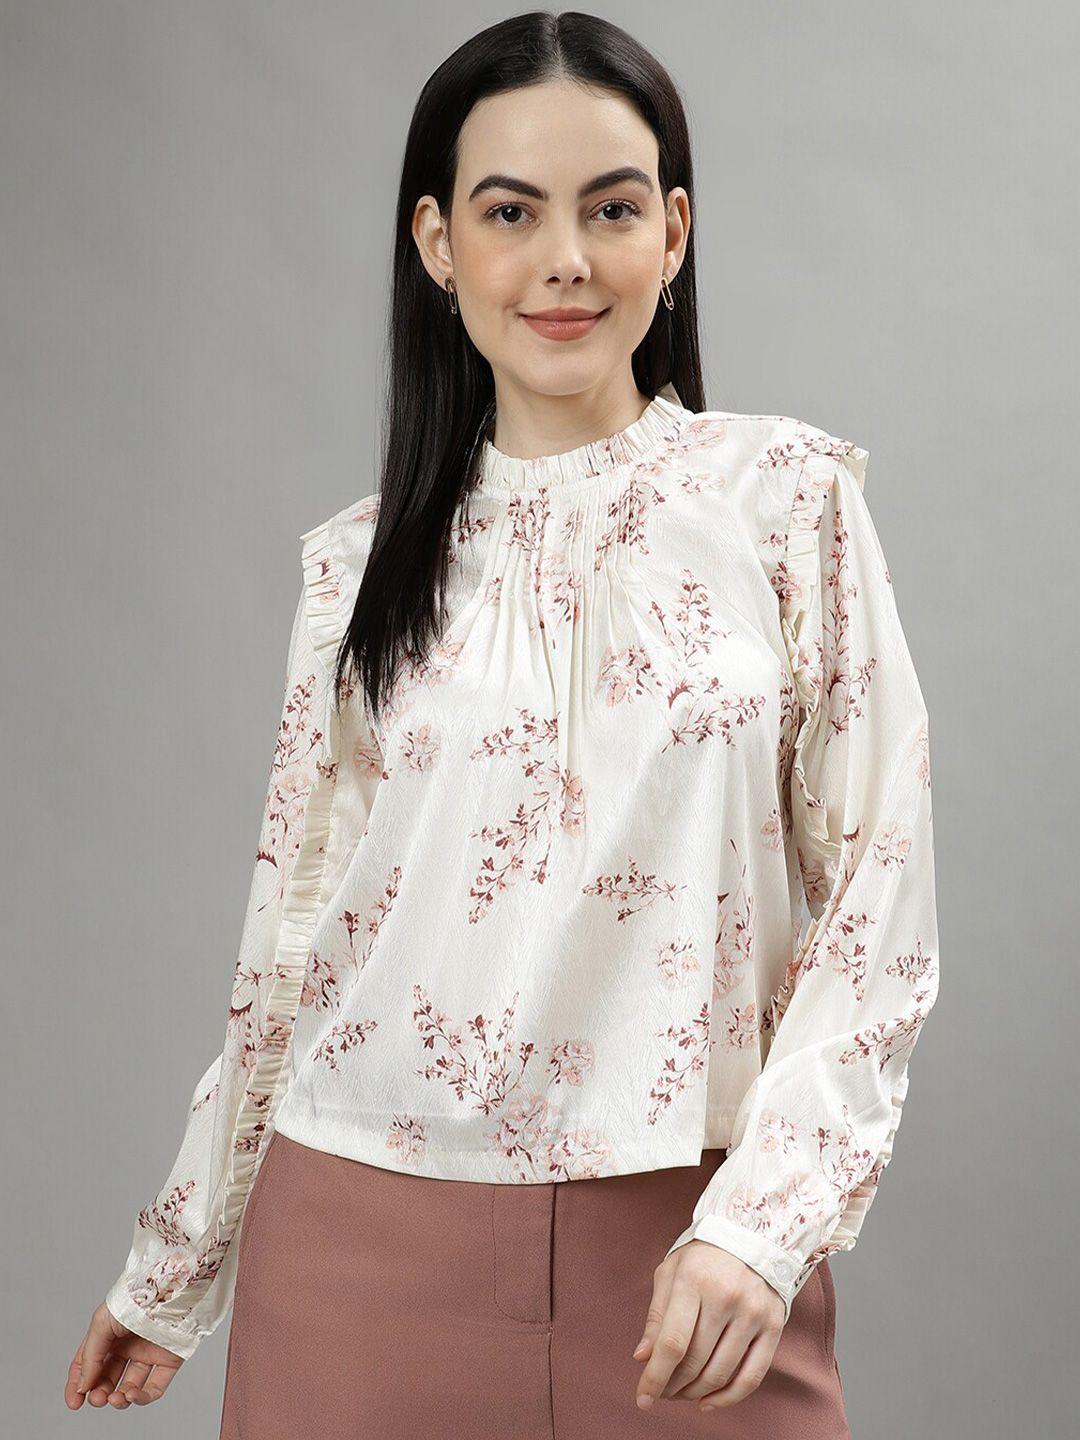 centrestage floral printed top